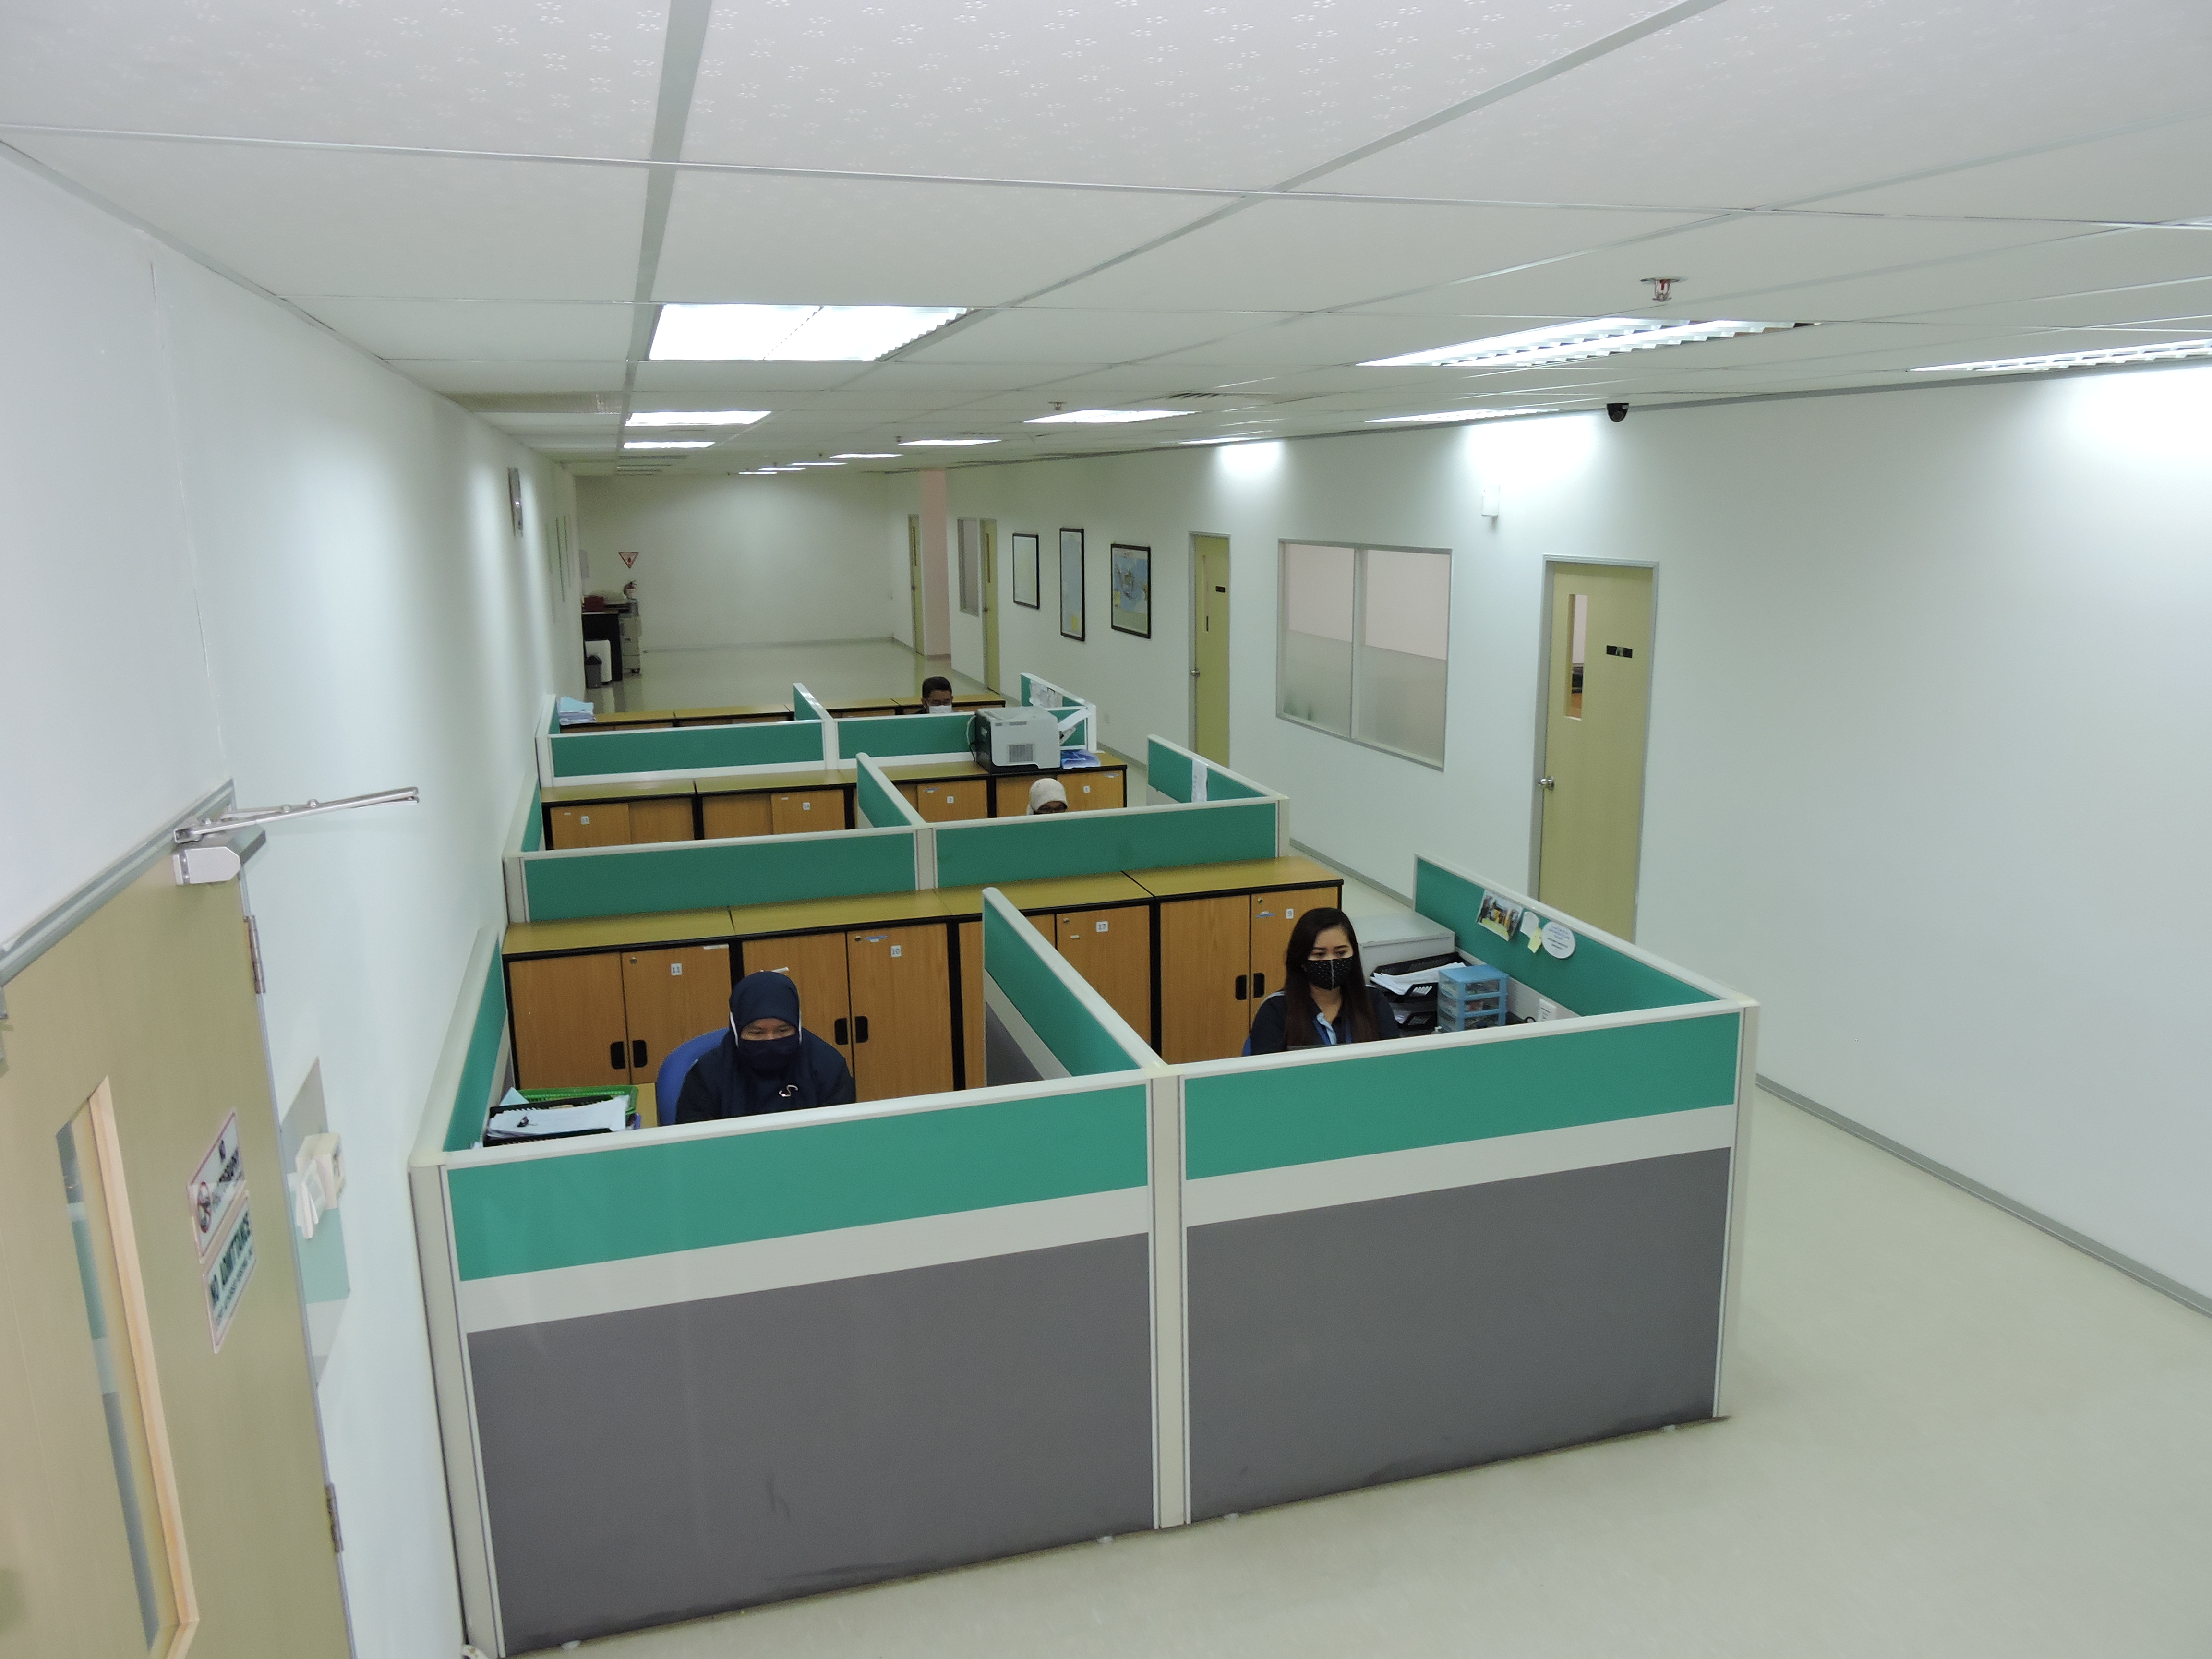 Office space at Intricon, a global leader in micromedical technology and joint development manufacturer